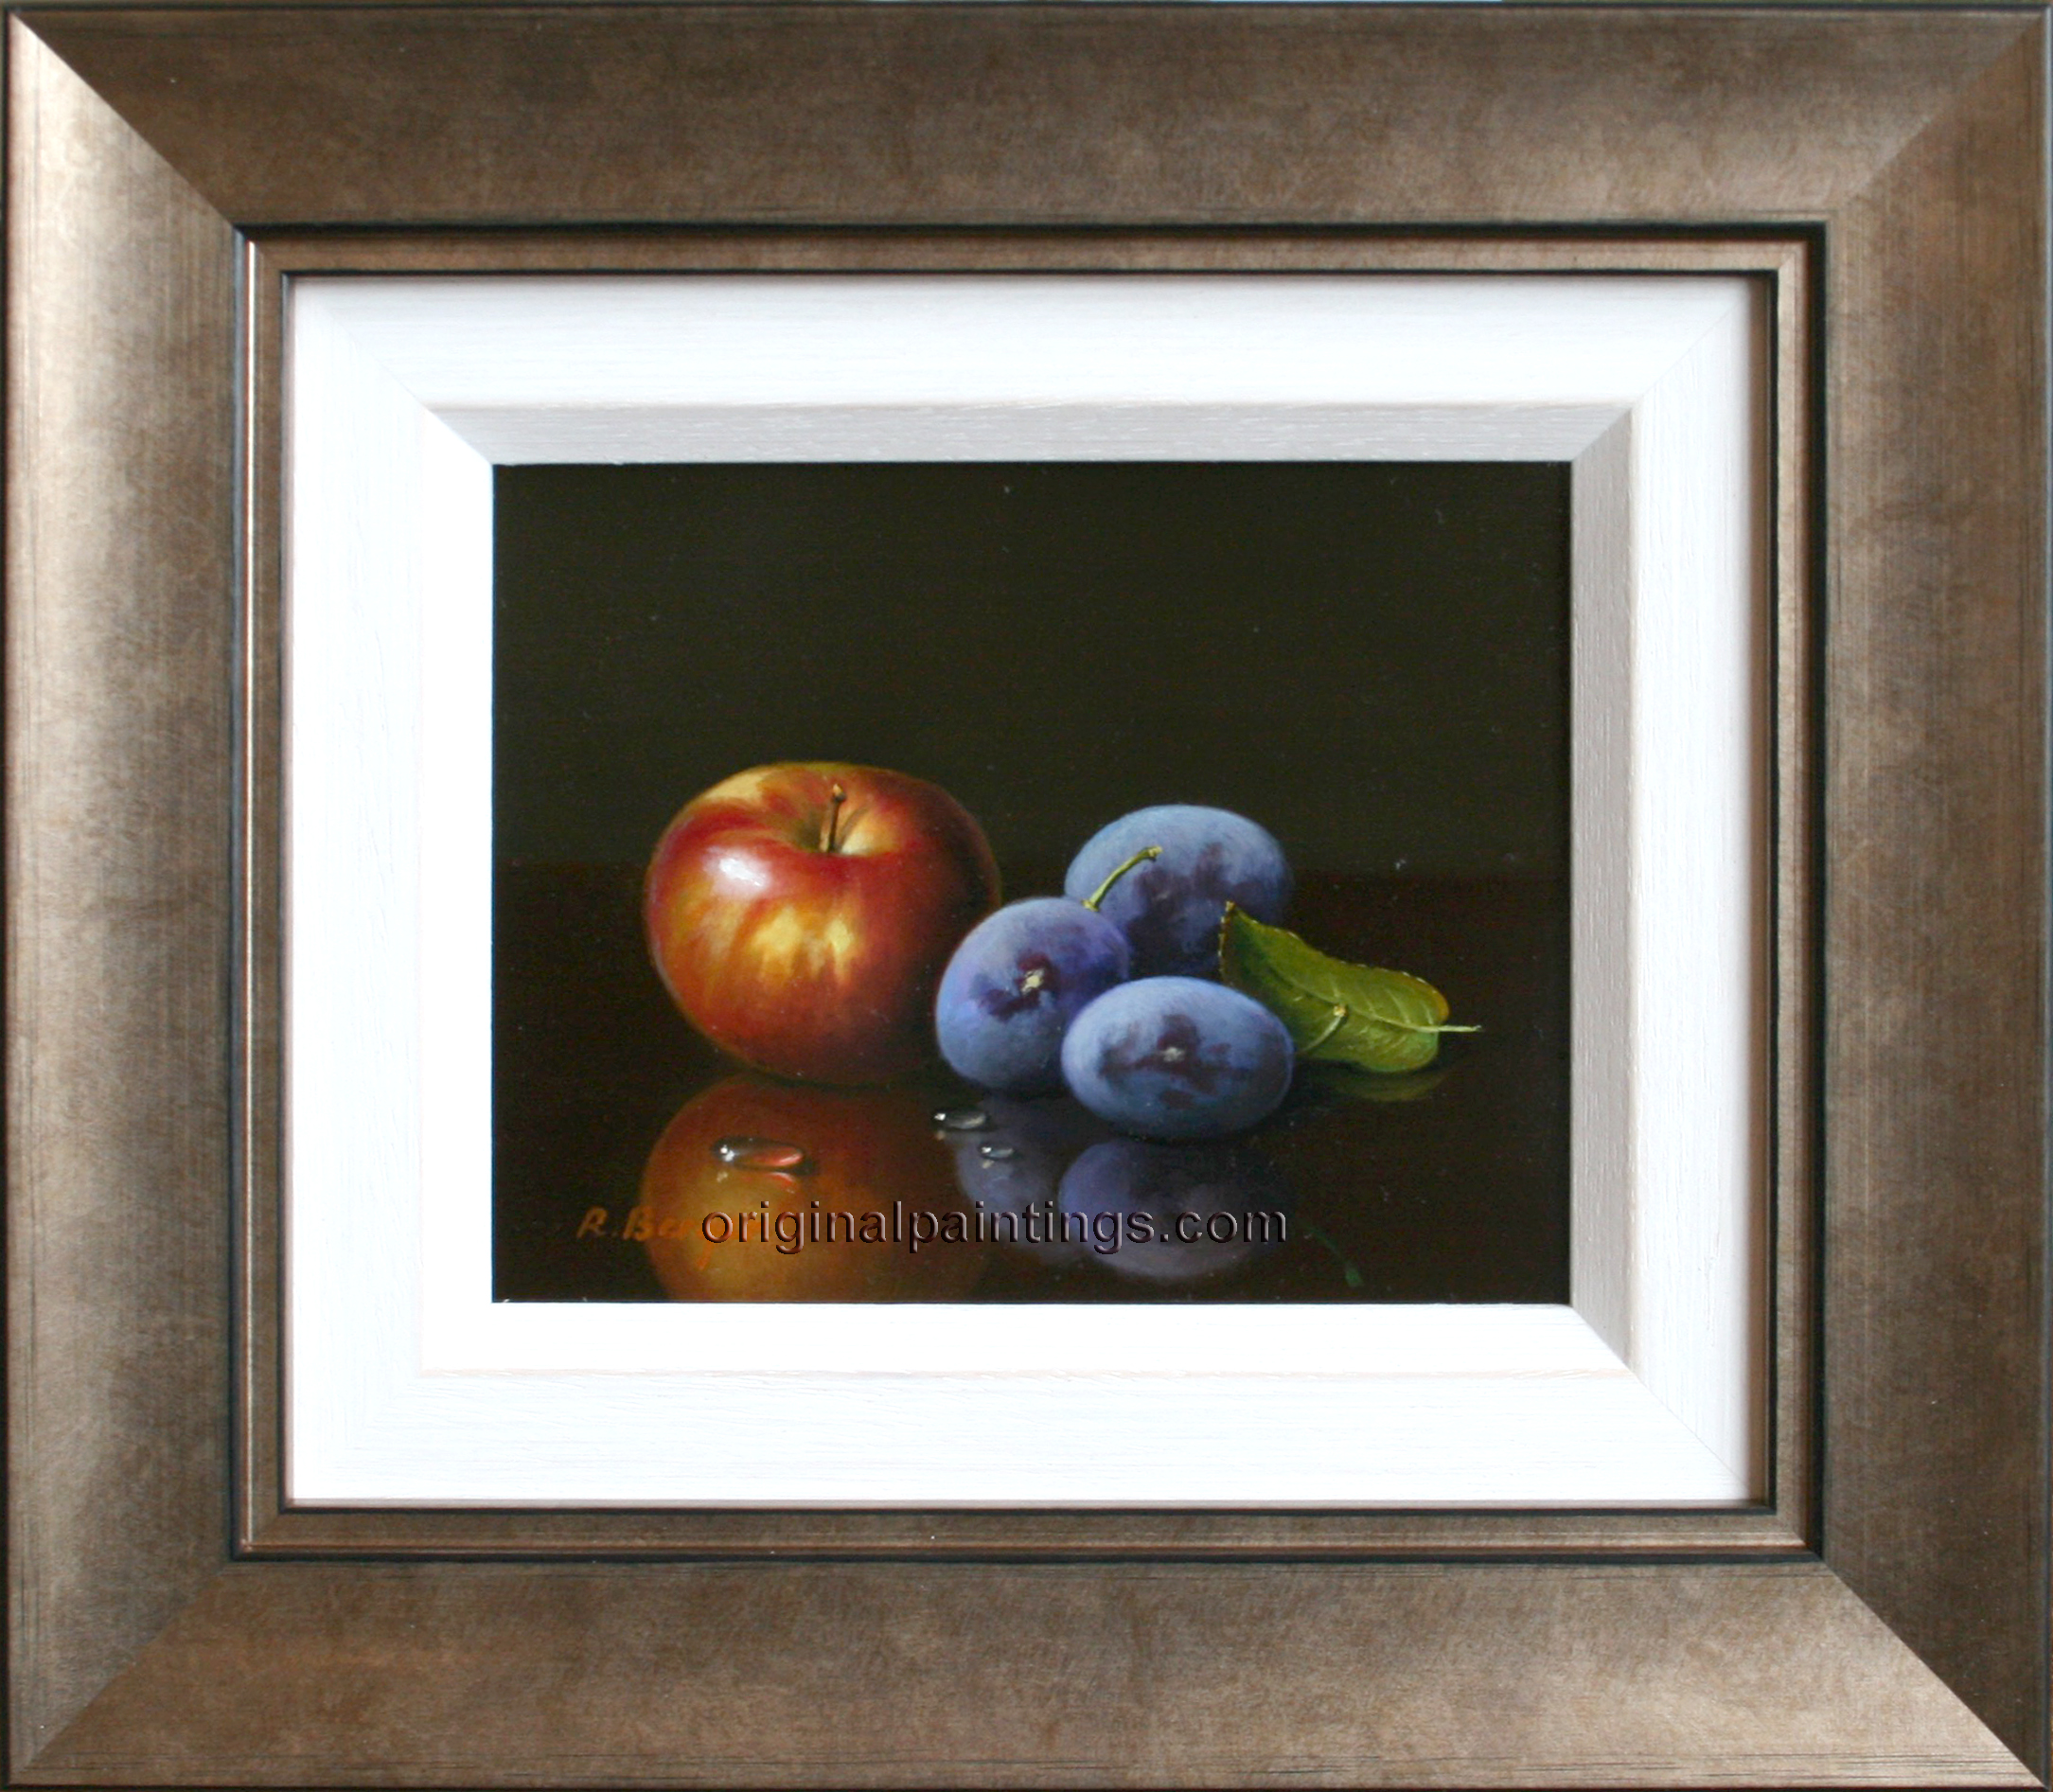 Berger, Original Oil Painting, Still Life with Apple & Plums